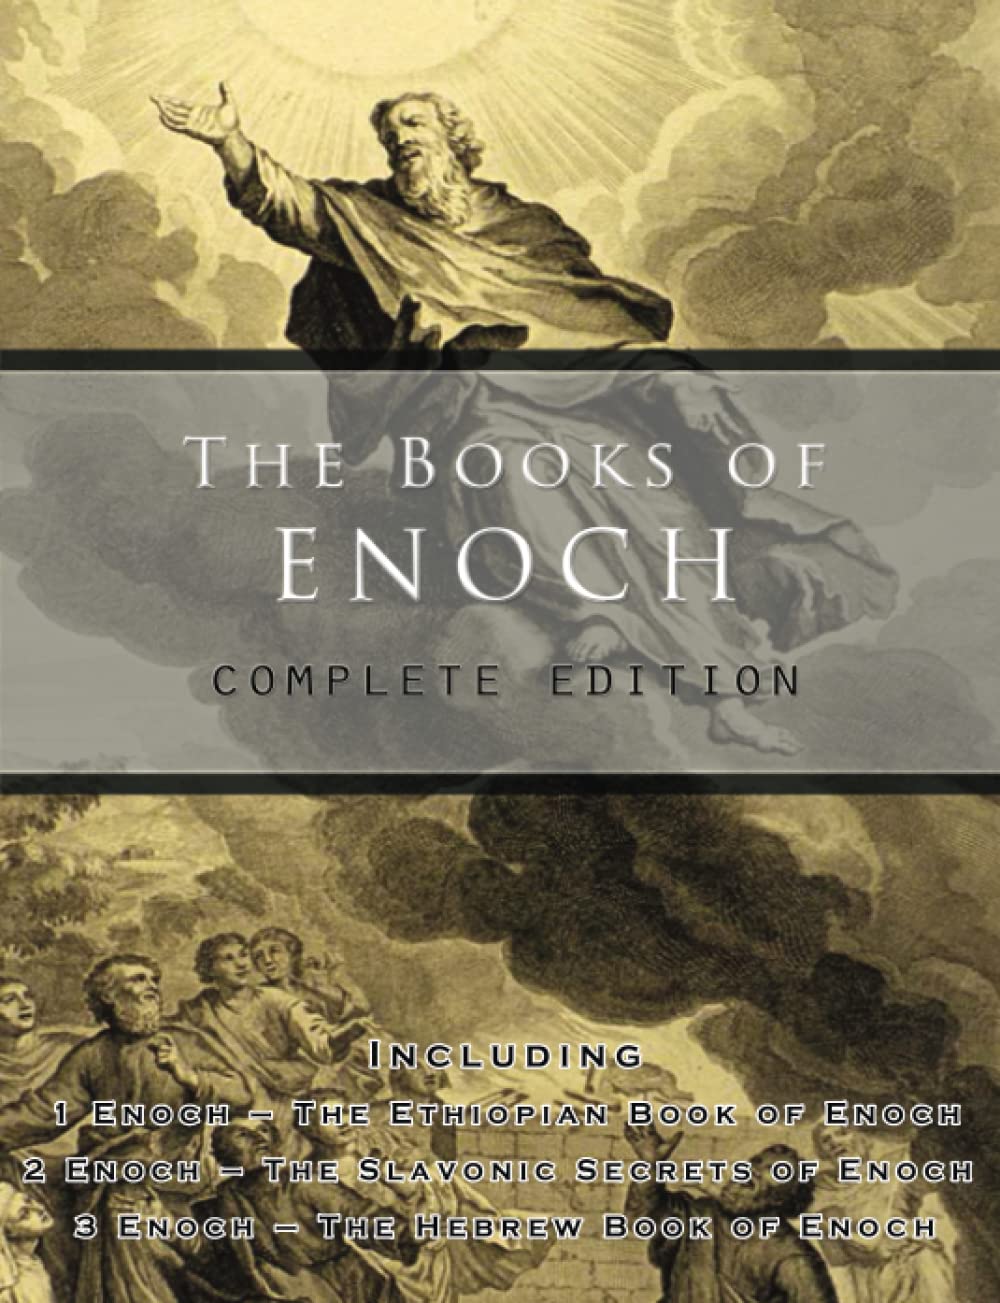 The Books of Enoch: Complete edition: Including (1) The Ethiopian Book of Enoch